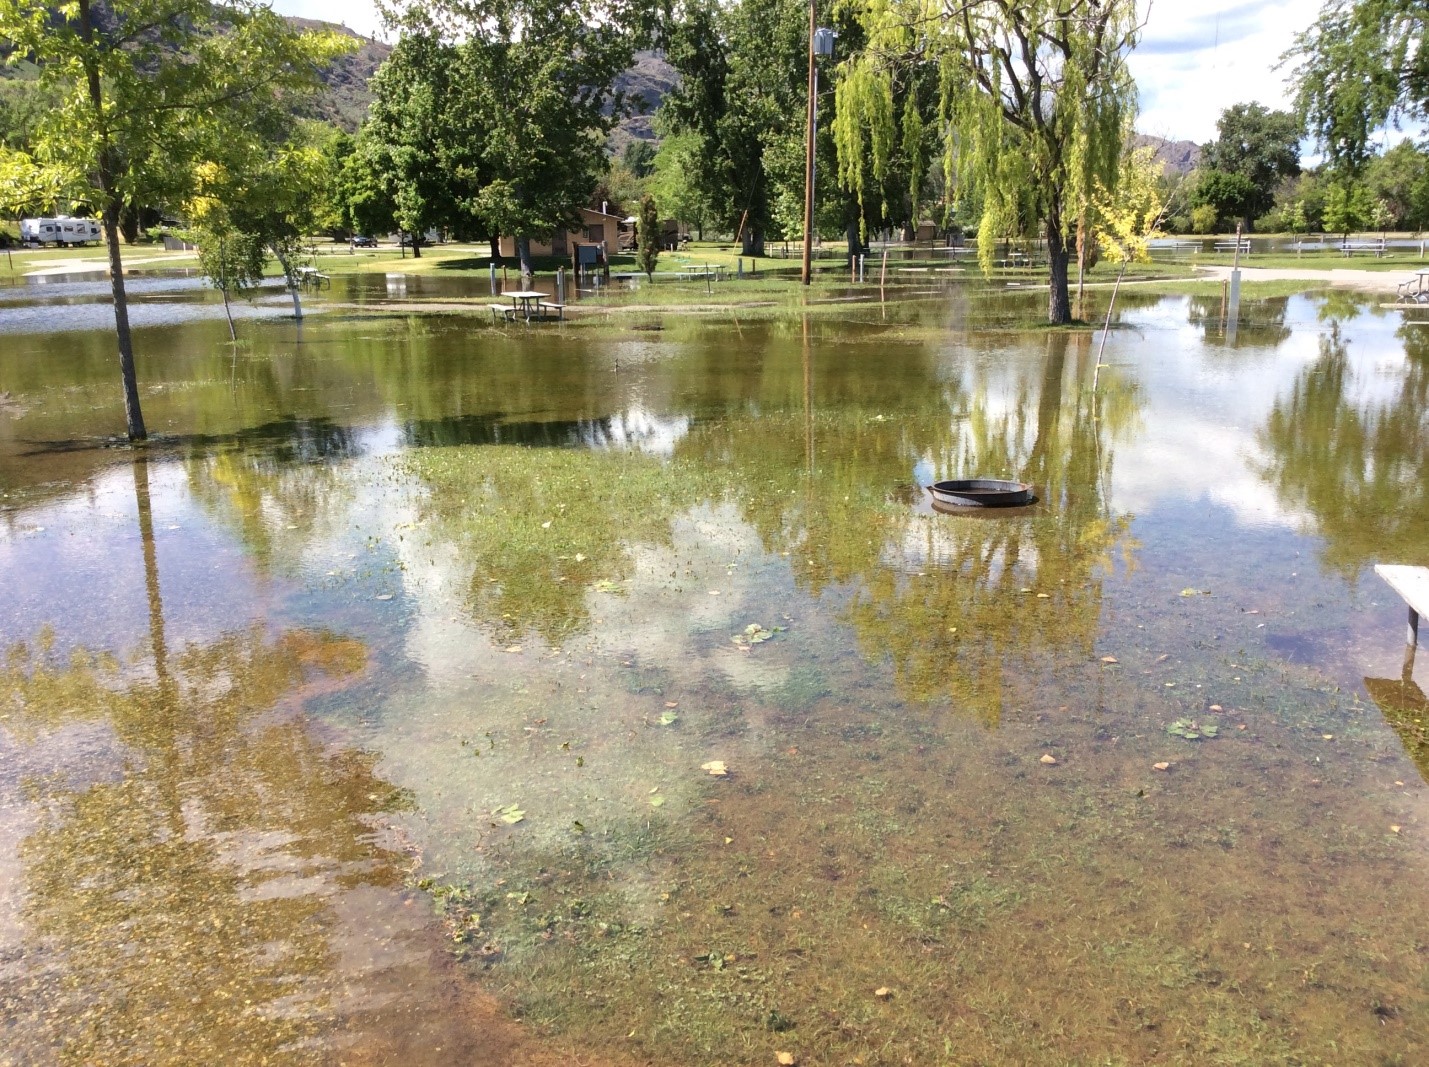 Floodwaters on Osoyoos Lake covered Veterans Memorial Park in Oroville, Washington, in early June. Waters entered communities throughout the Okanagan basin in Washington and British Columbia. Credit: Brian Symonds